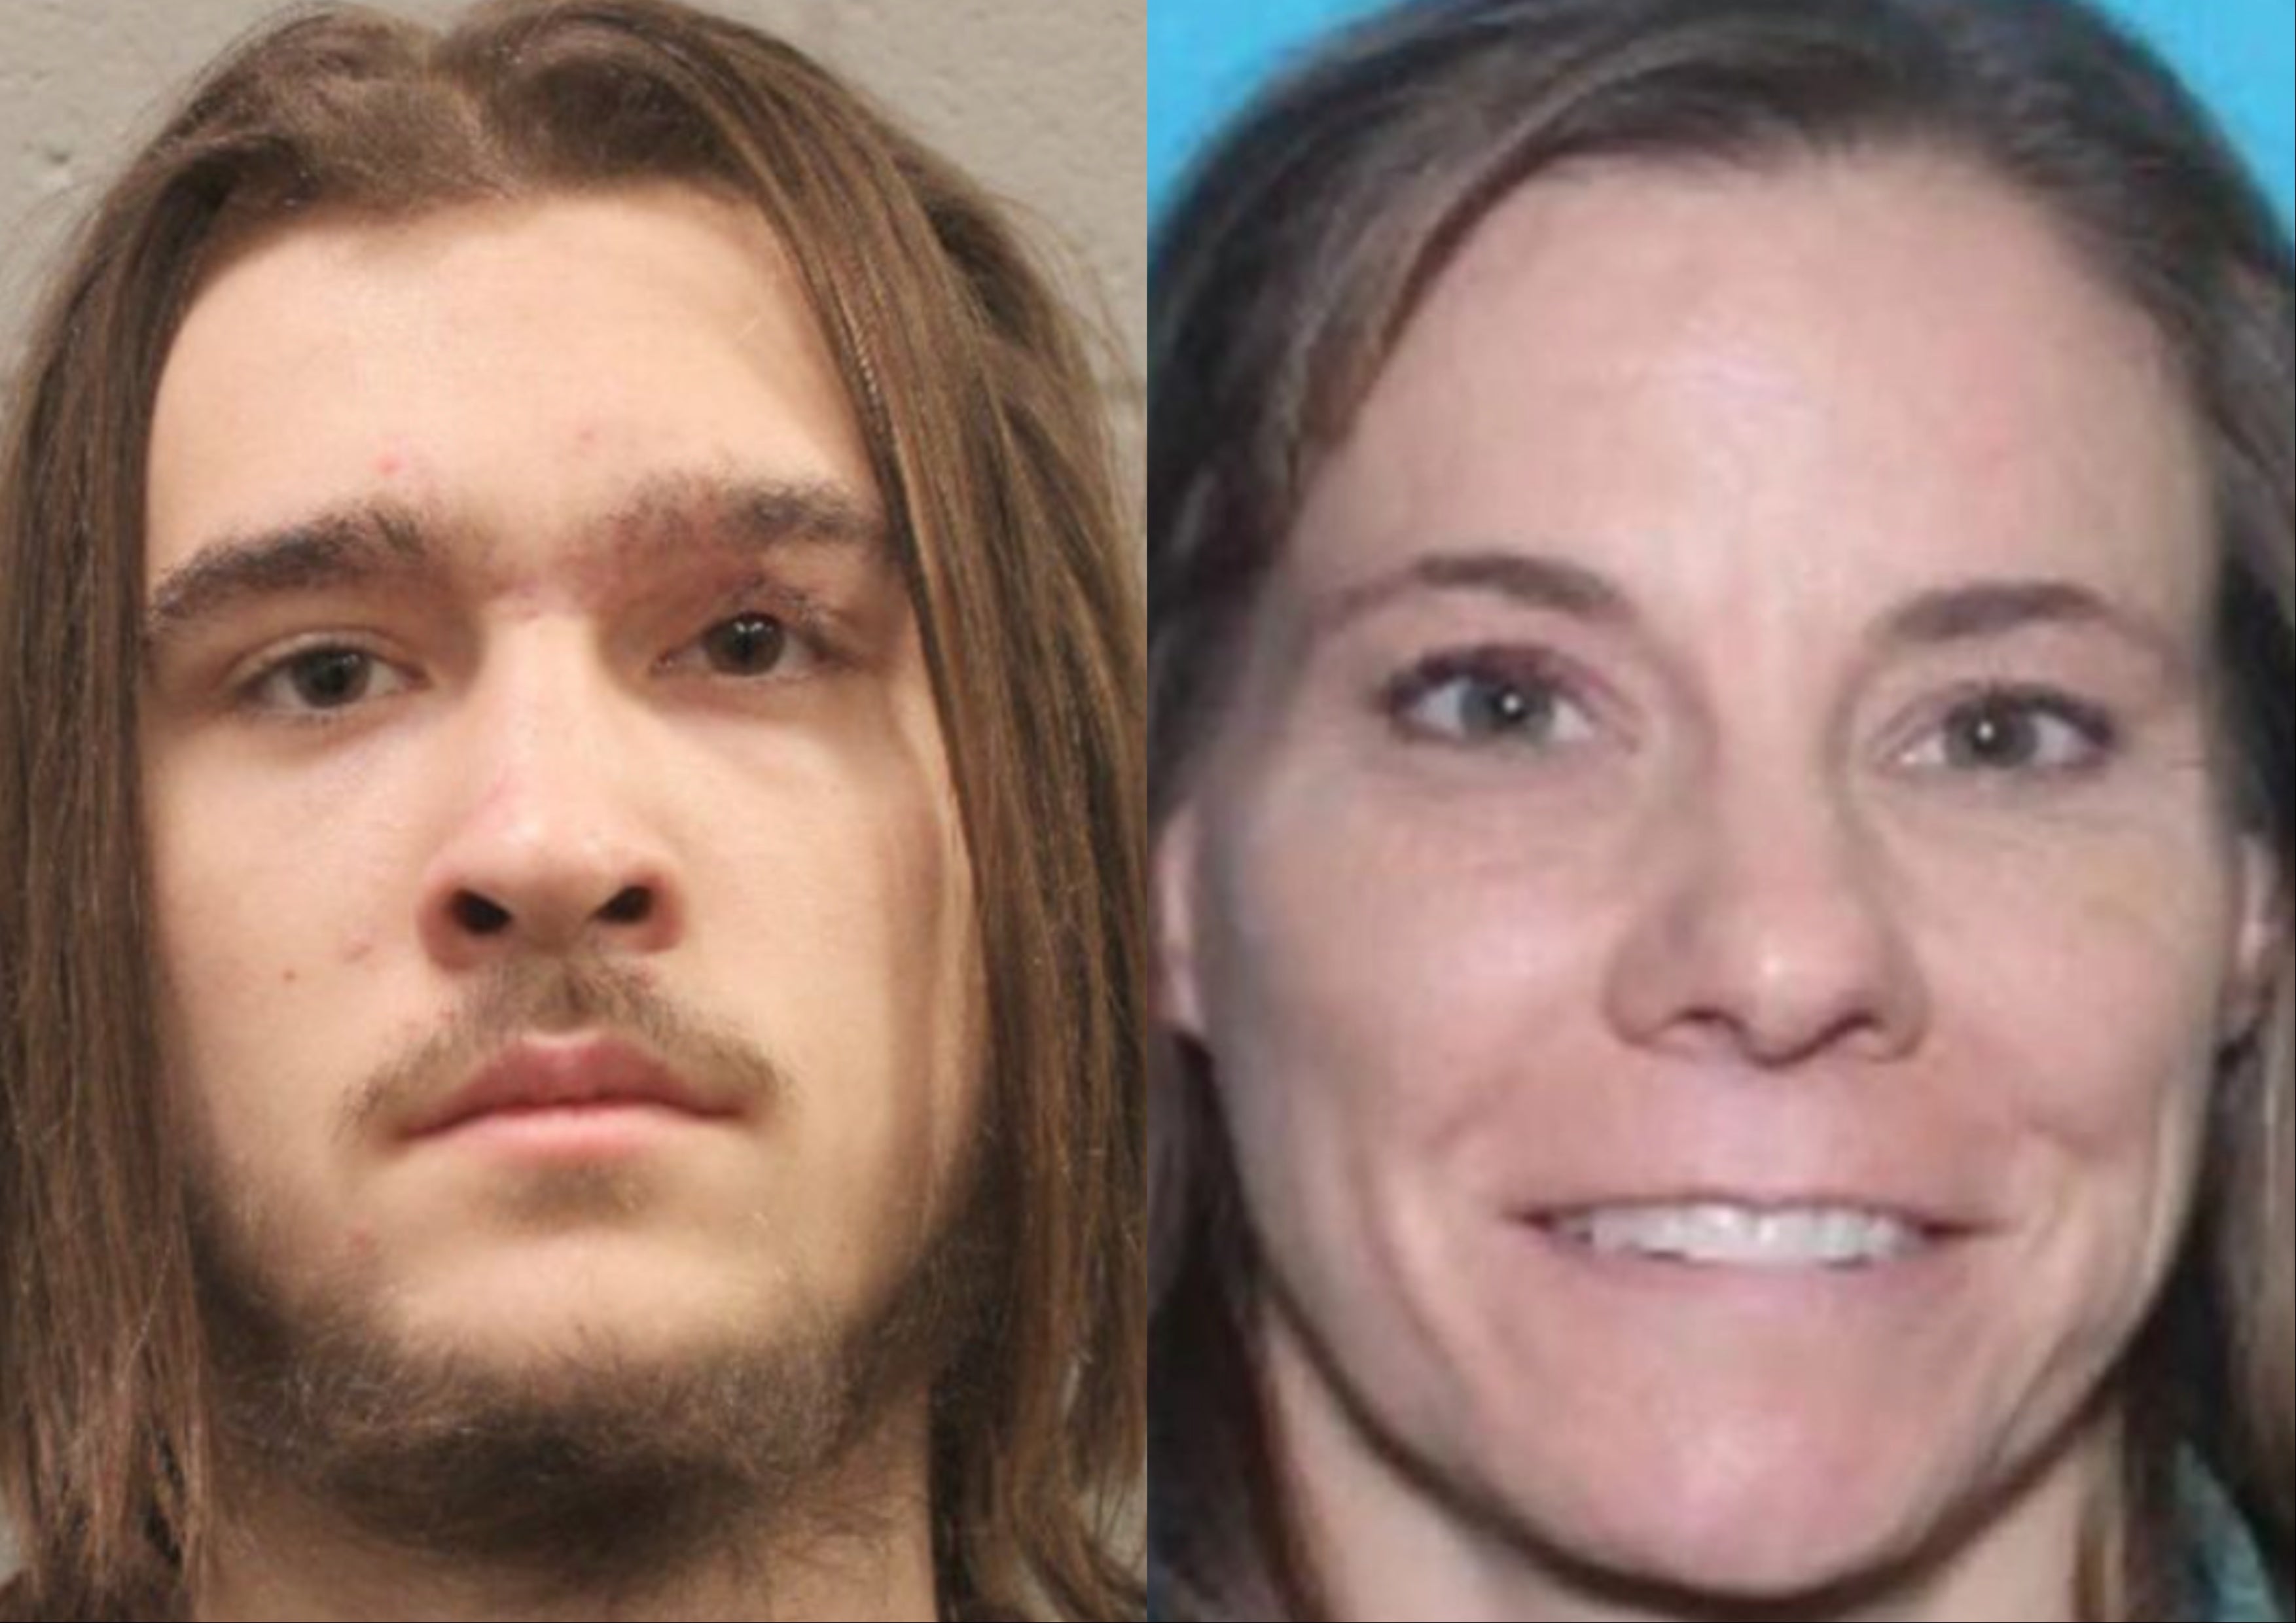 Tyler Roenz, 19, will spend decades behind prison after pleading guilty this week to killing his mother, 49-year-old Michelle Roenz.